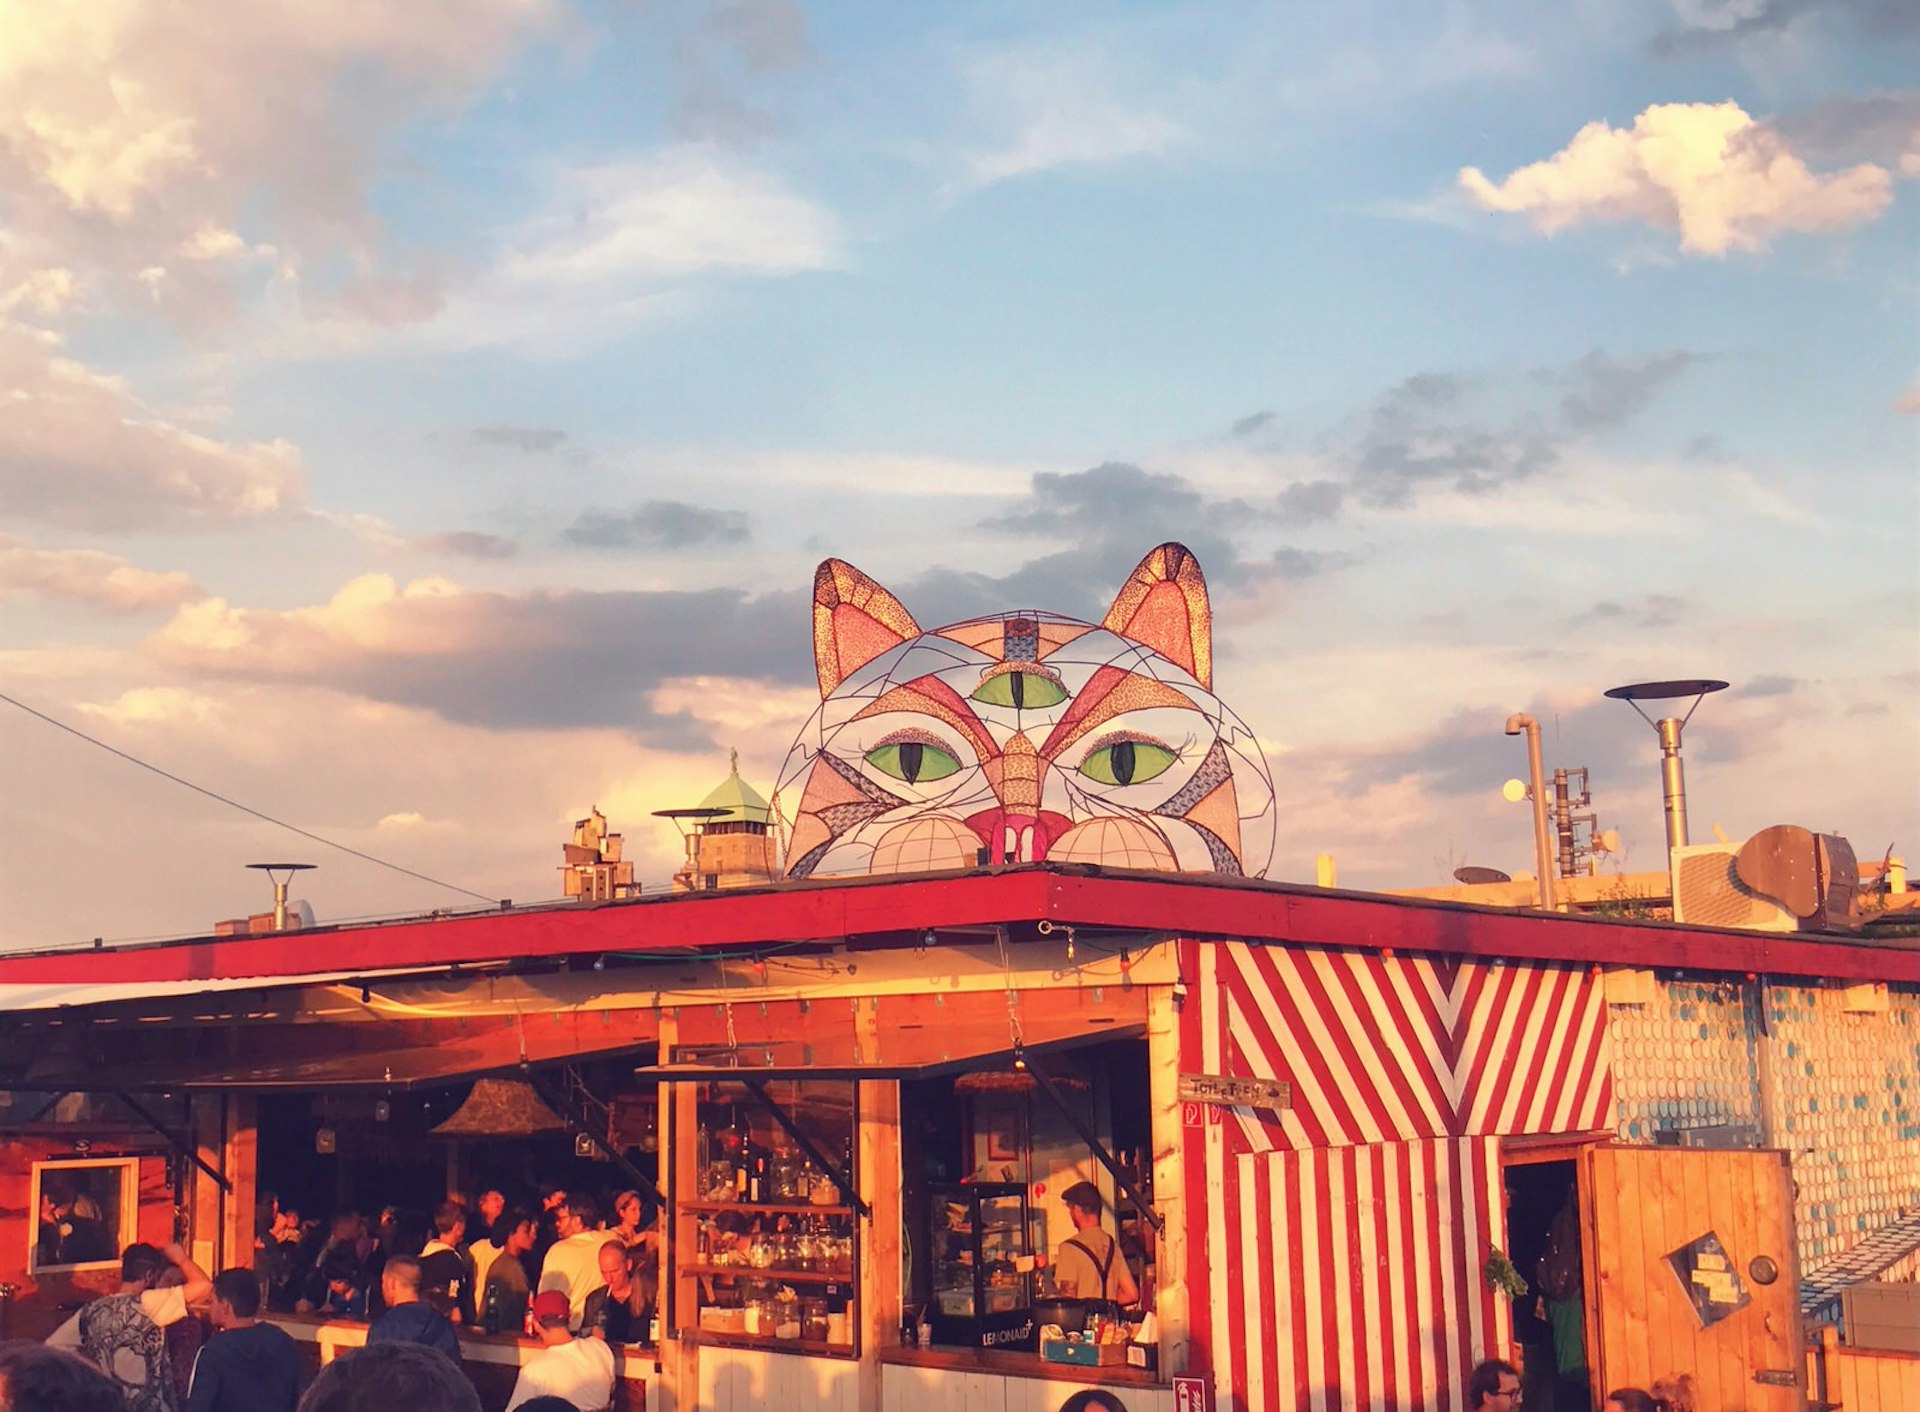 A colourful three eyed cat casts its gaze over the rooftop housing the bustling bar at Klunkerkranich against a cloudy blue sky. © Jennifer Sojka / Lonely Planet